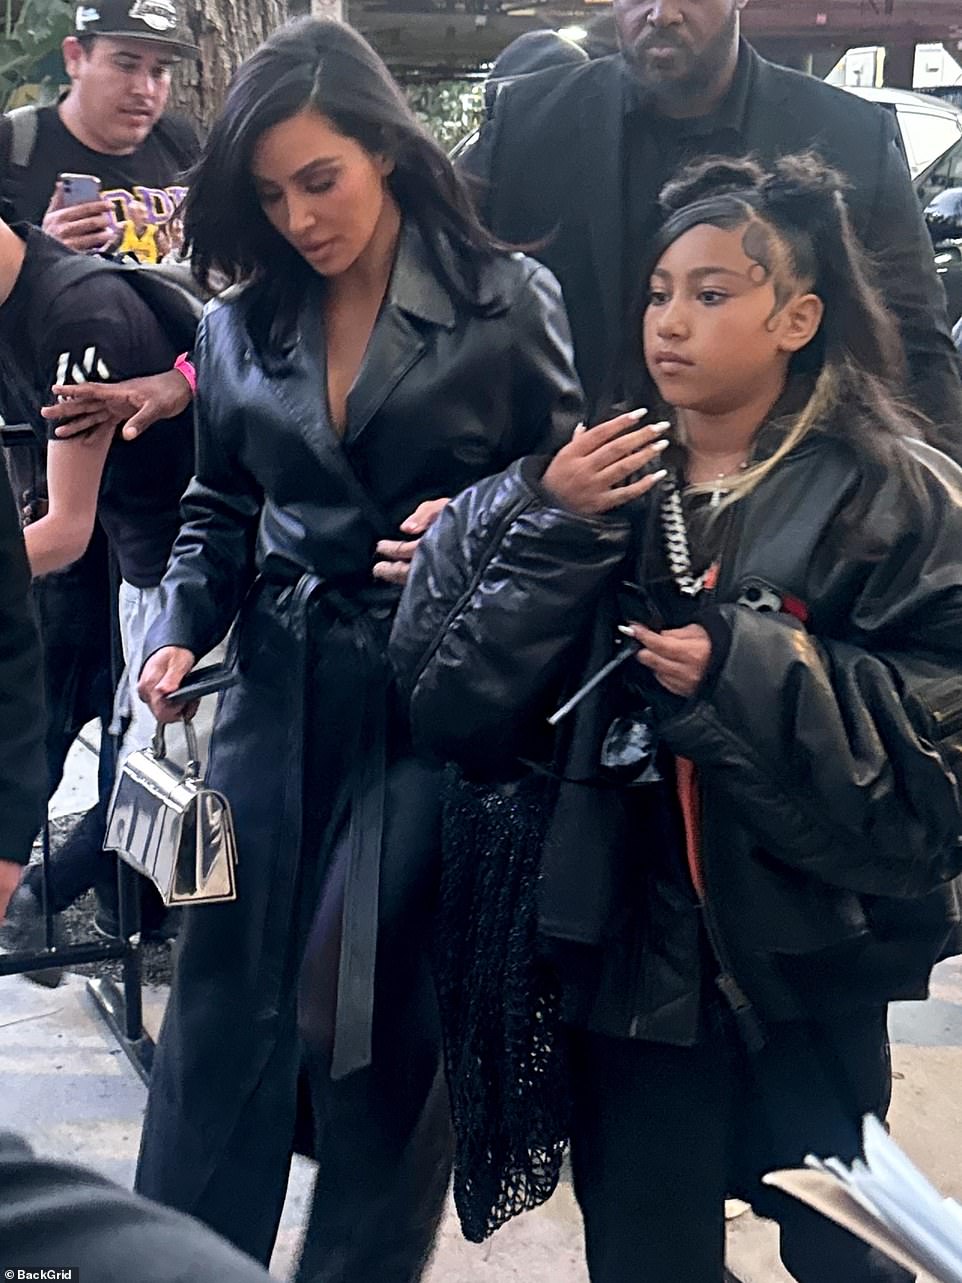 Kim later stepped out with 10-year-old daughter North West on Tuesday night for the Los Angeles Lakers game